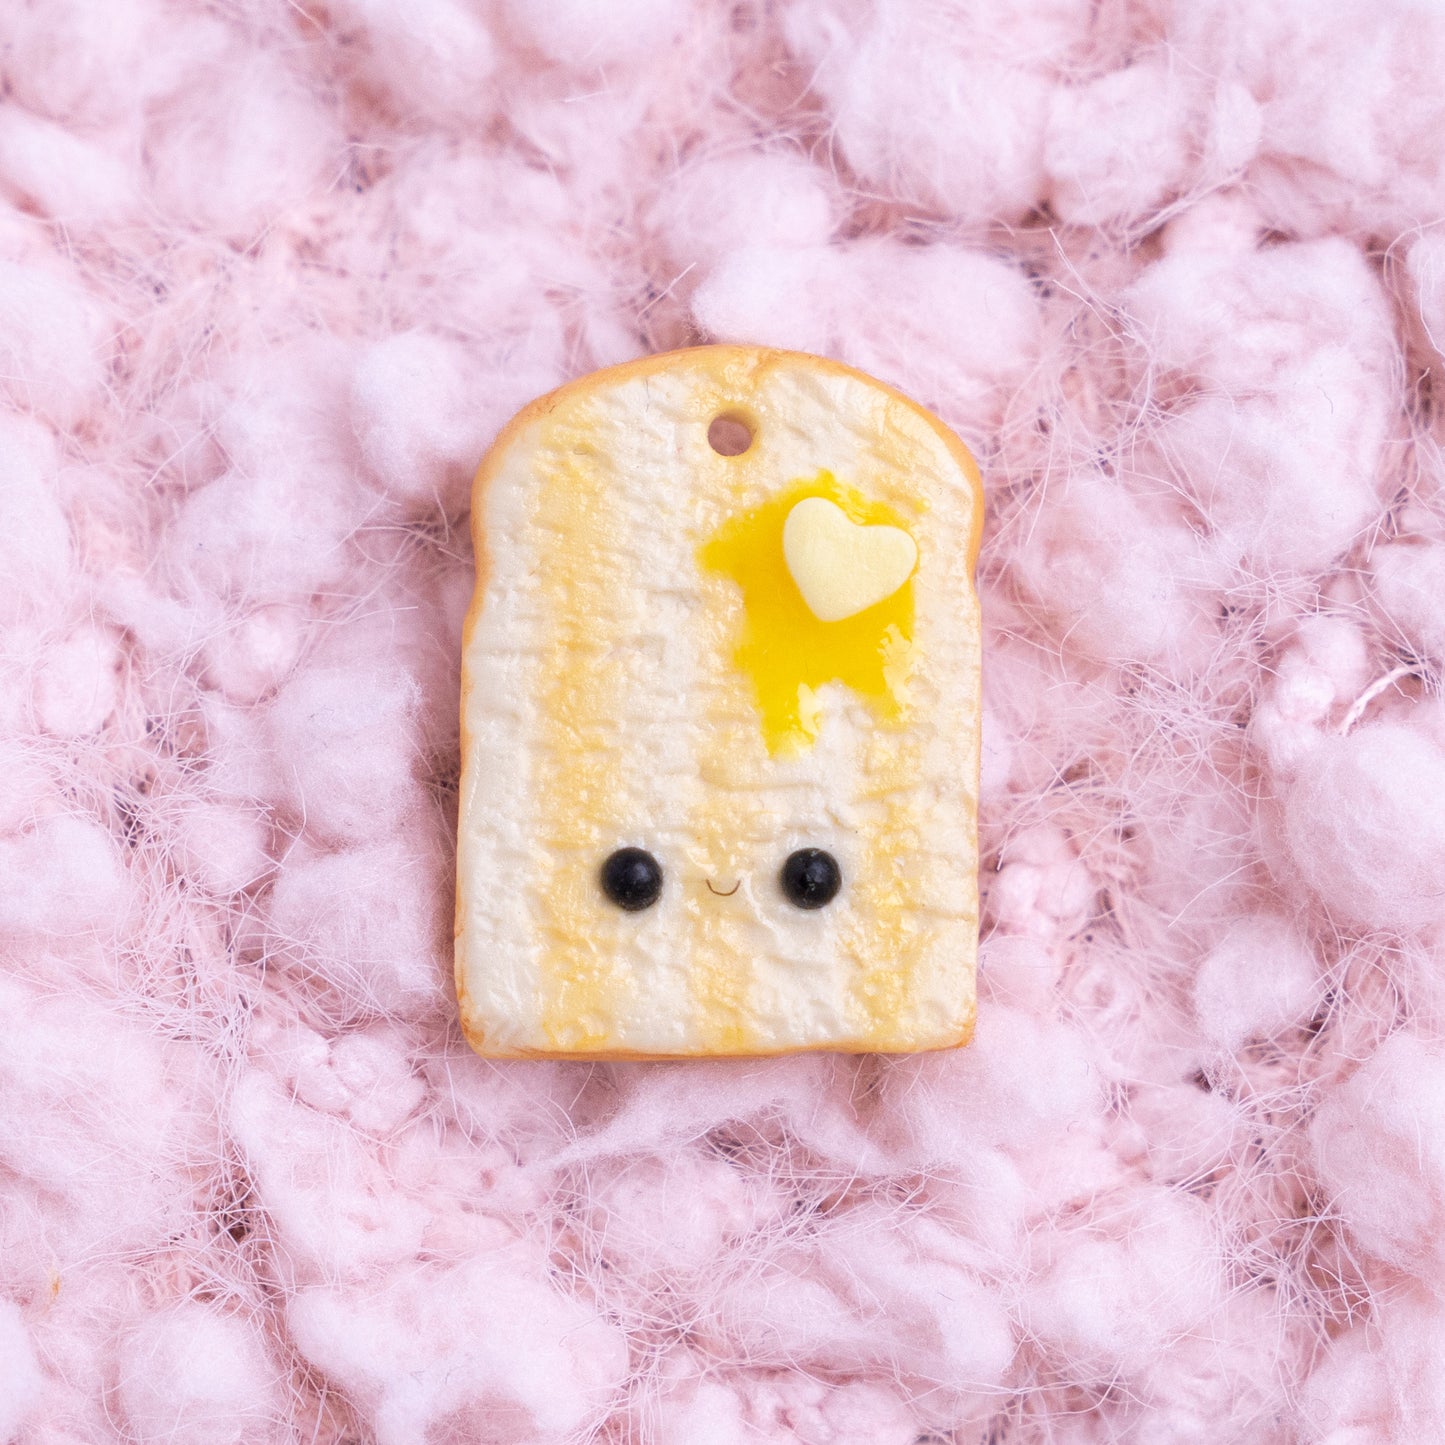 Buttered Toast Charm